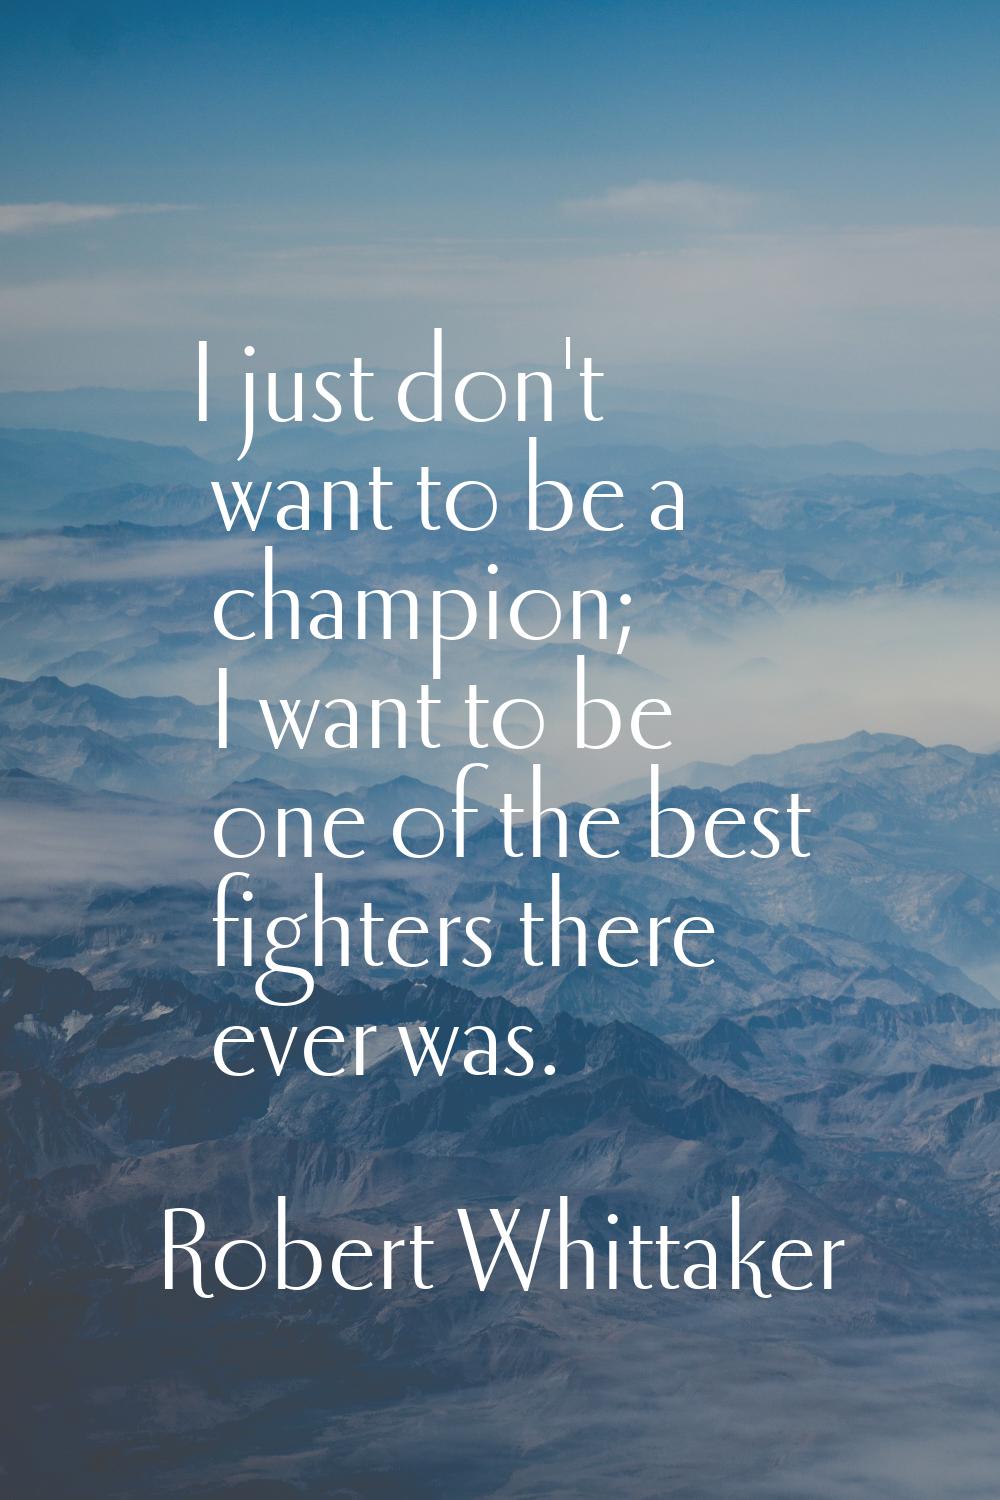 I just don't want to be a champion; I want to be one of the best fighters there ever was.